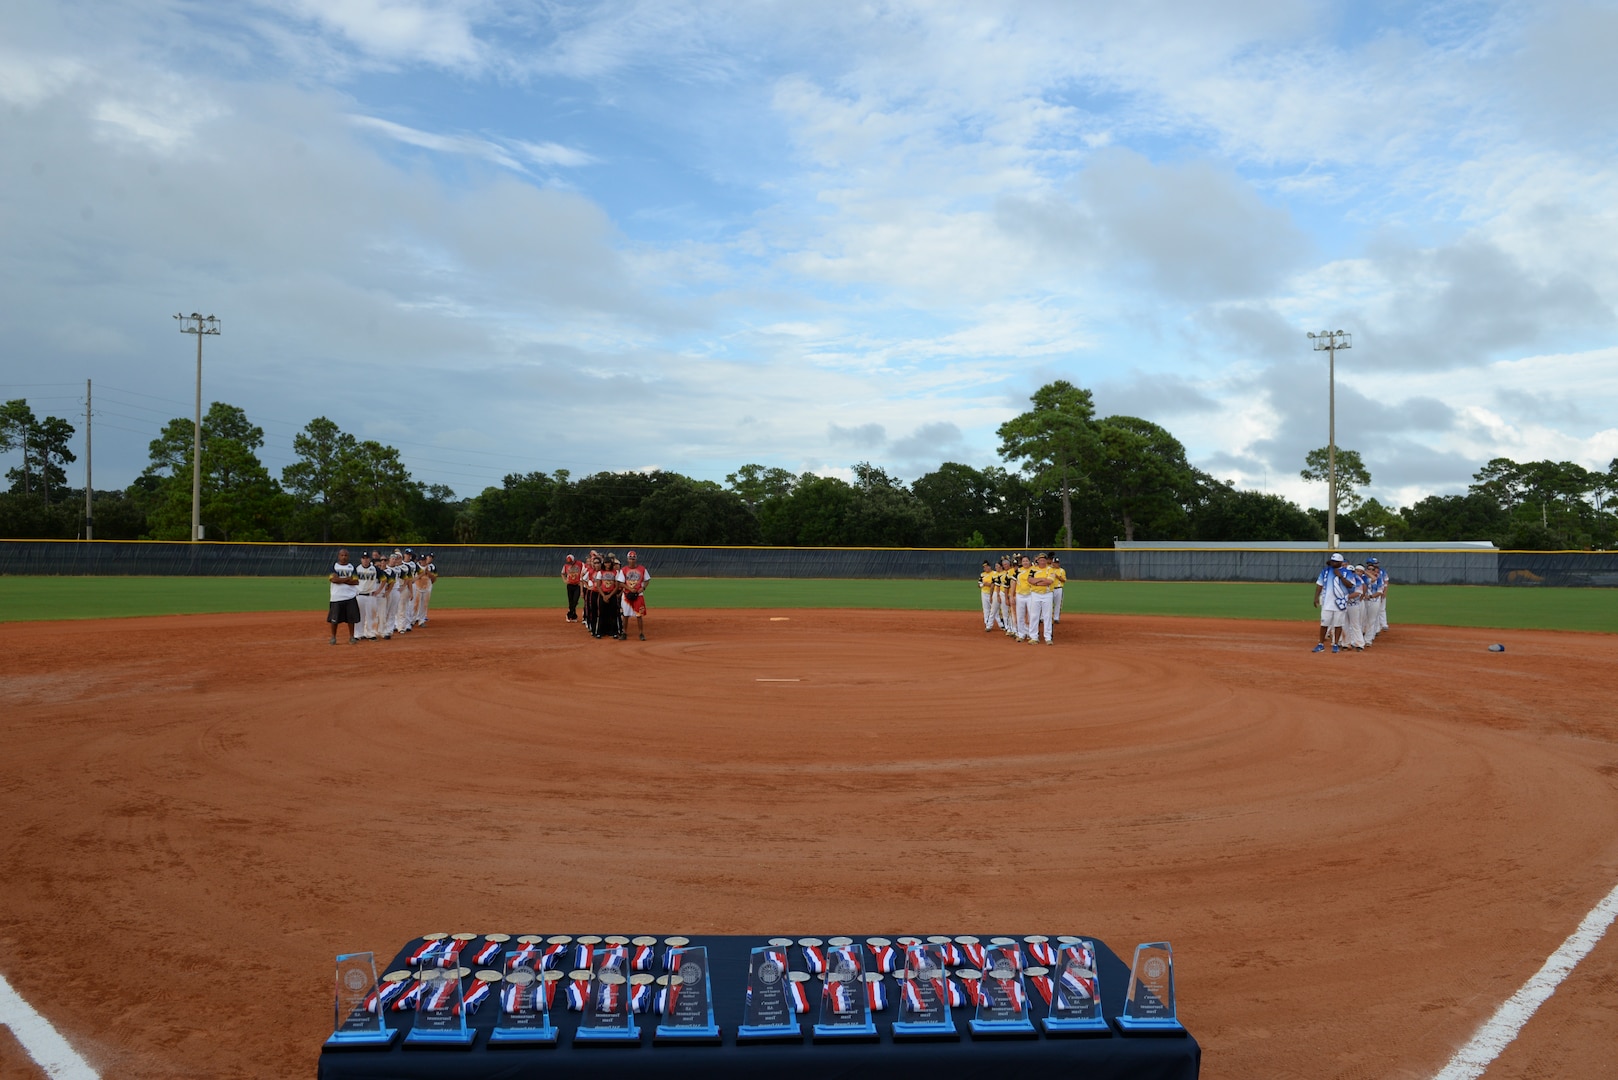 PENSACOLA, Fla.-- Teams gather for the closing ceremonies of the 2018 Women's Armed Forces Softball Championship, Aug. 15-17. Teams from the Navy, Army and Marine Corps tried to dethrone the defending champion Air Force team, but the Air Force ladies win gold for a second year(. (U.S. Navy photo by Mass Communication Specialist 2nd Class Timothy A. Hazel/Released)